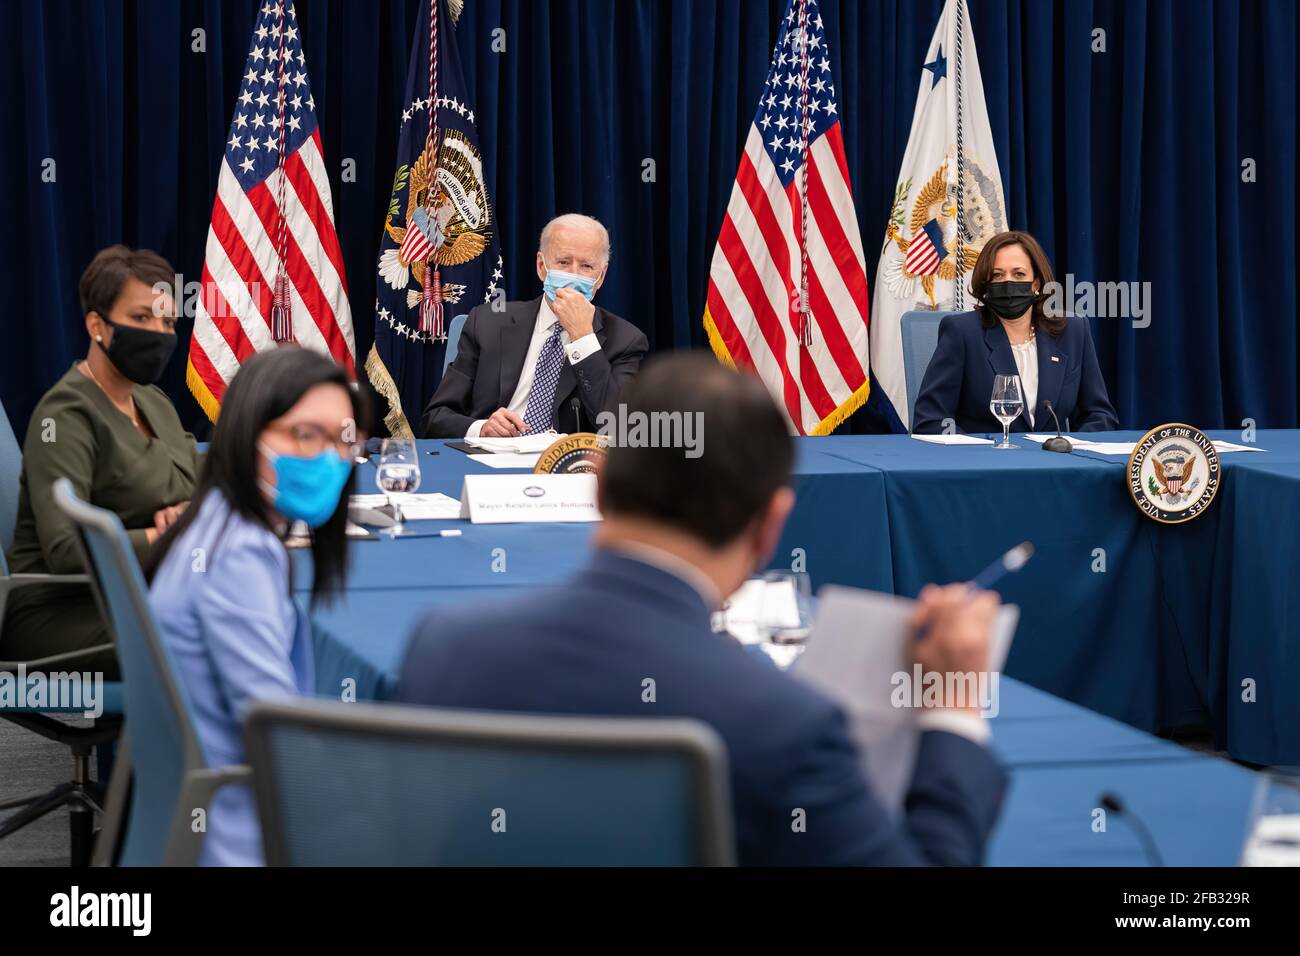 President Joe Biden and Vice President Kamala Harris, joined by Atlanta Mayor Keisha Lance Bottoms, participate in a listening session with AAPI community leaders Friday, March 19, 2021, at Emory University in Atlanta.  (Official White House Photo by Adam Schultz) Stock Photo